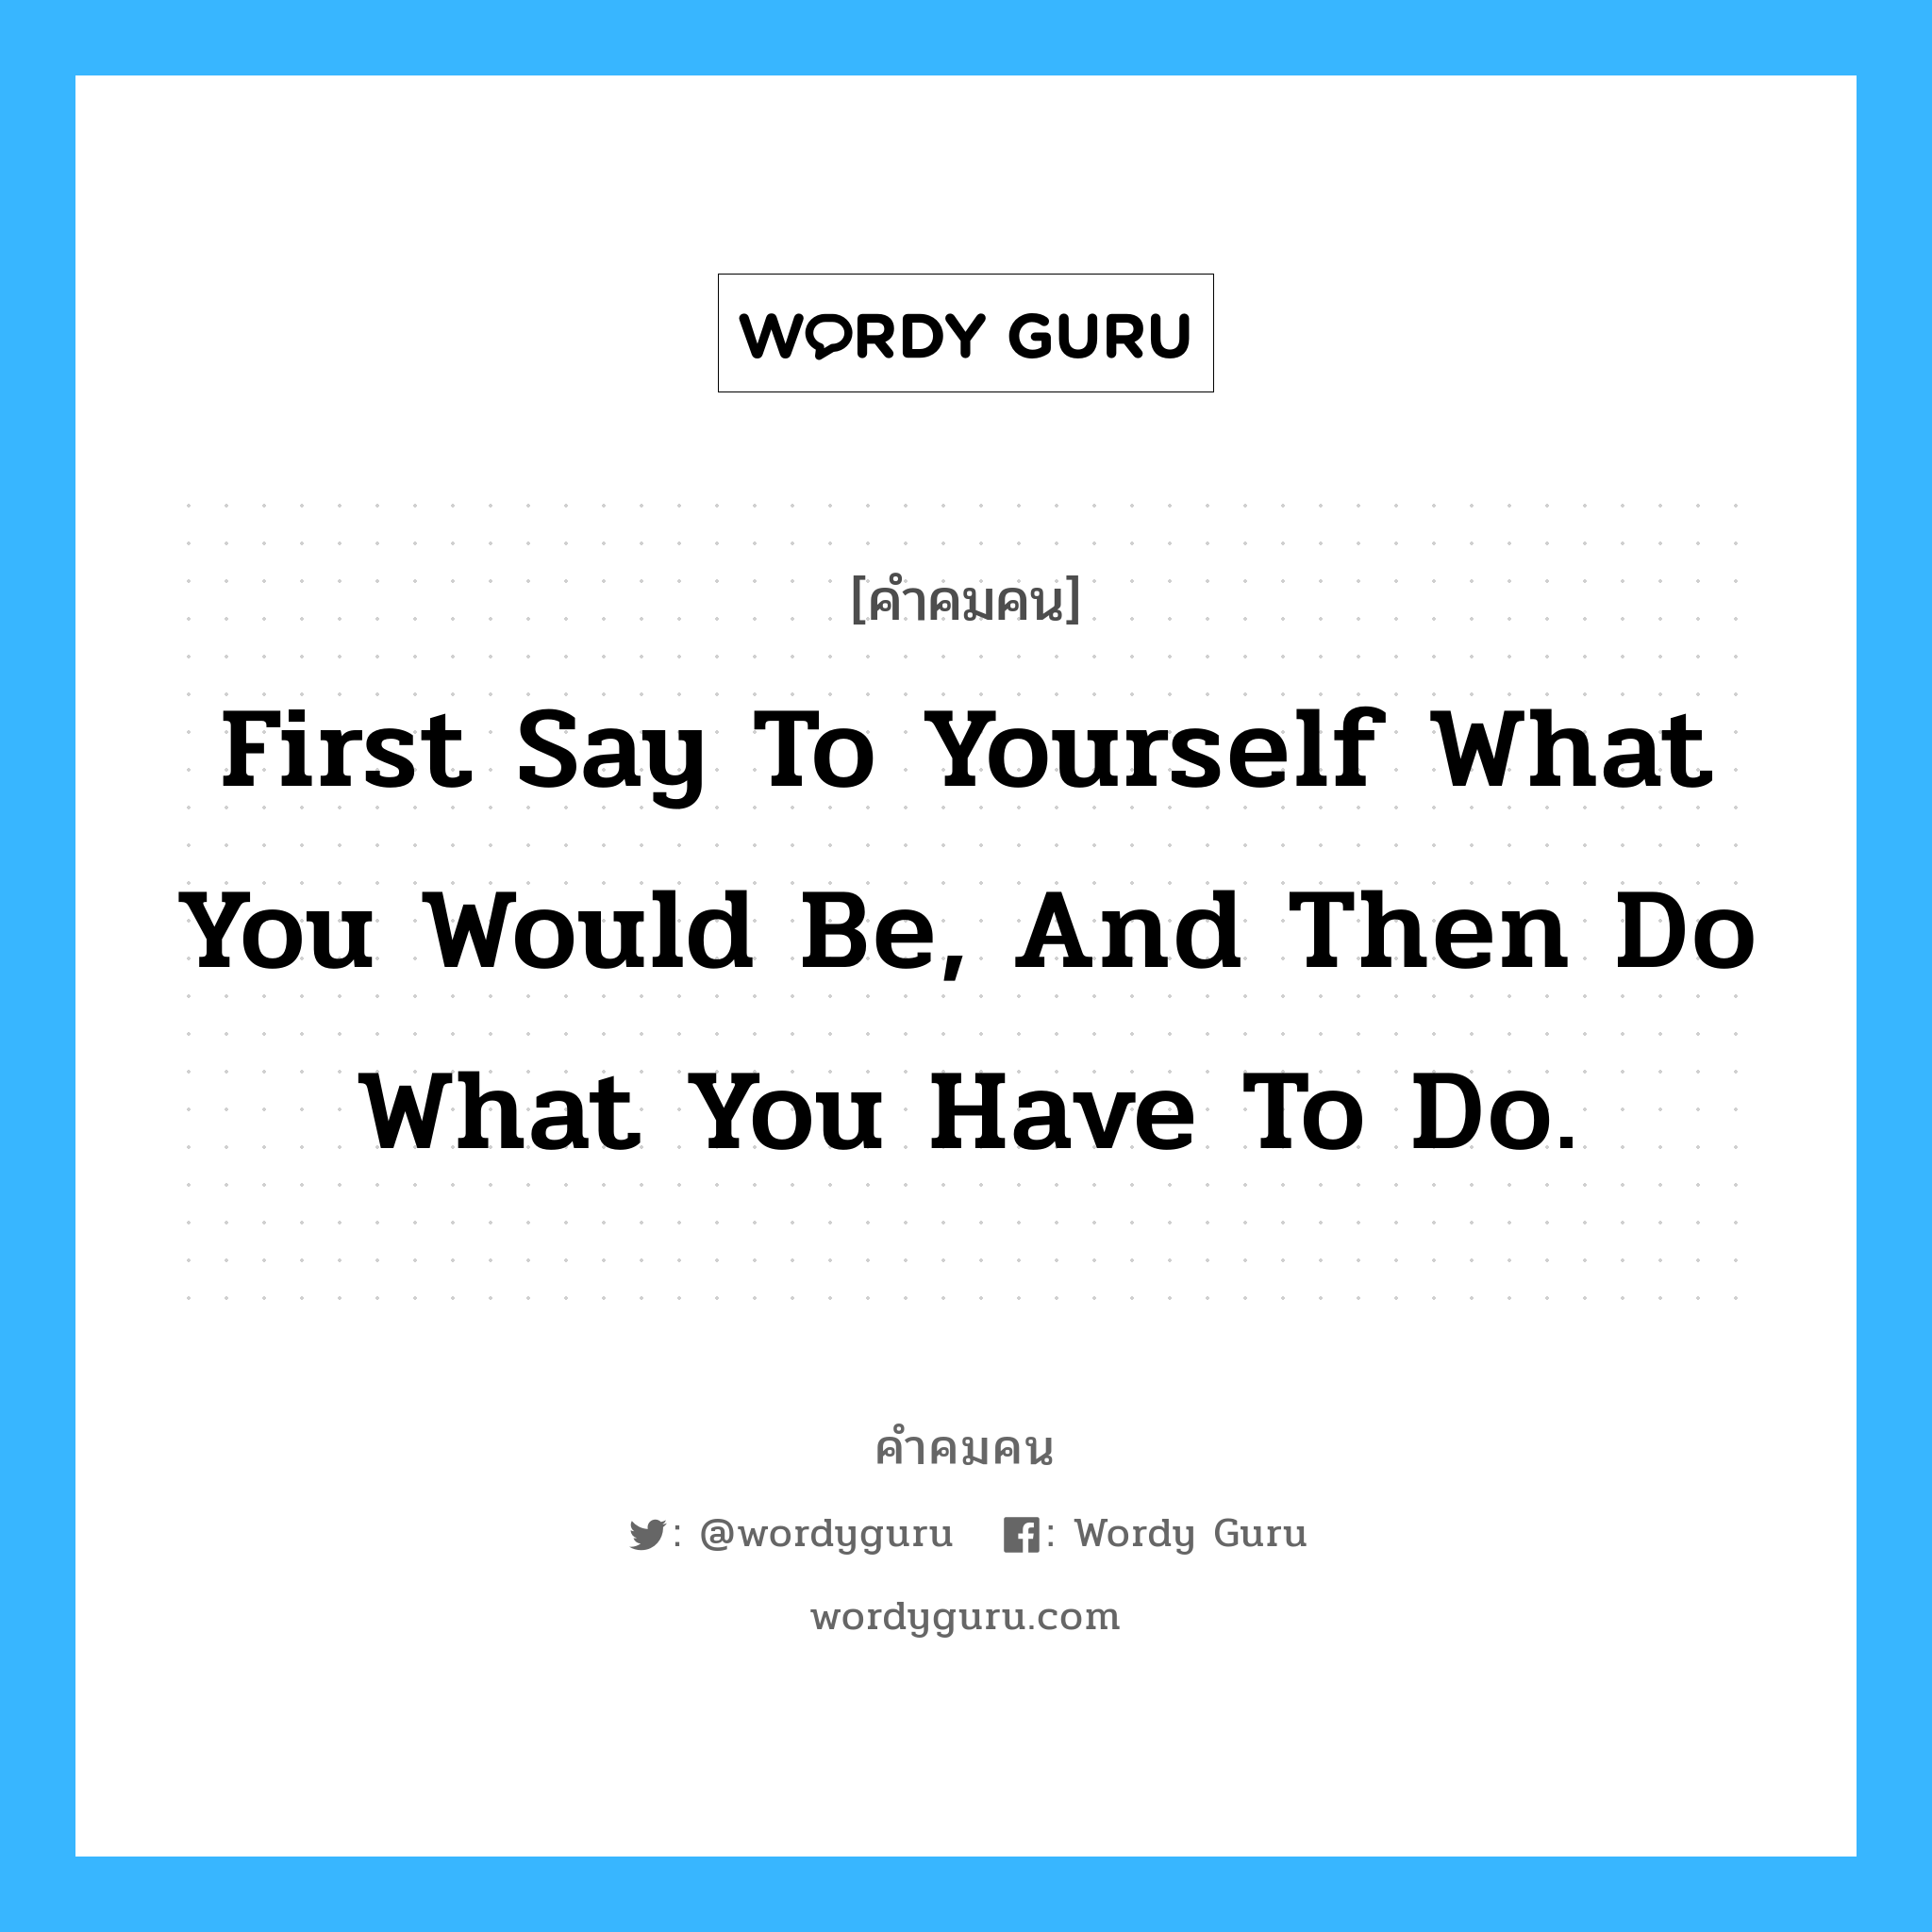 First say to yourself what you would be, and then do what you have to do., คำคมคน First say to yourself what you would be, and then do what you have to do. สิ่งแรกที่ต้องทำคือตั้งใจกับตัวเอง และลงมือทำ Epictetus (55-135 C.E.) หมวด Epictetus (55-135 C.E.)